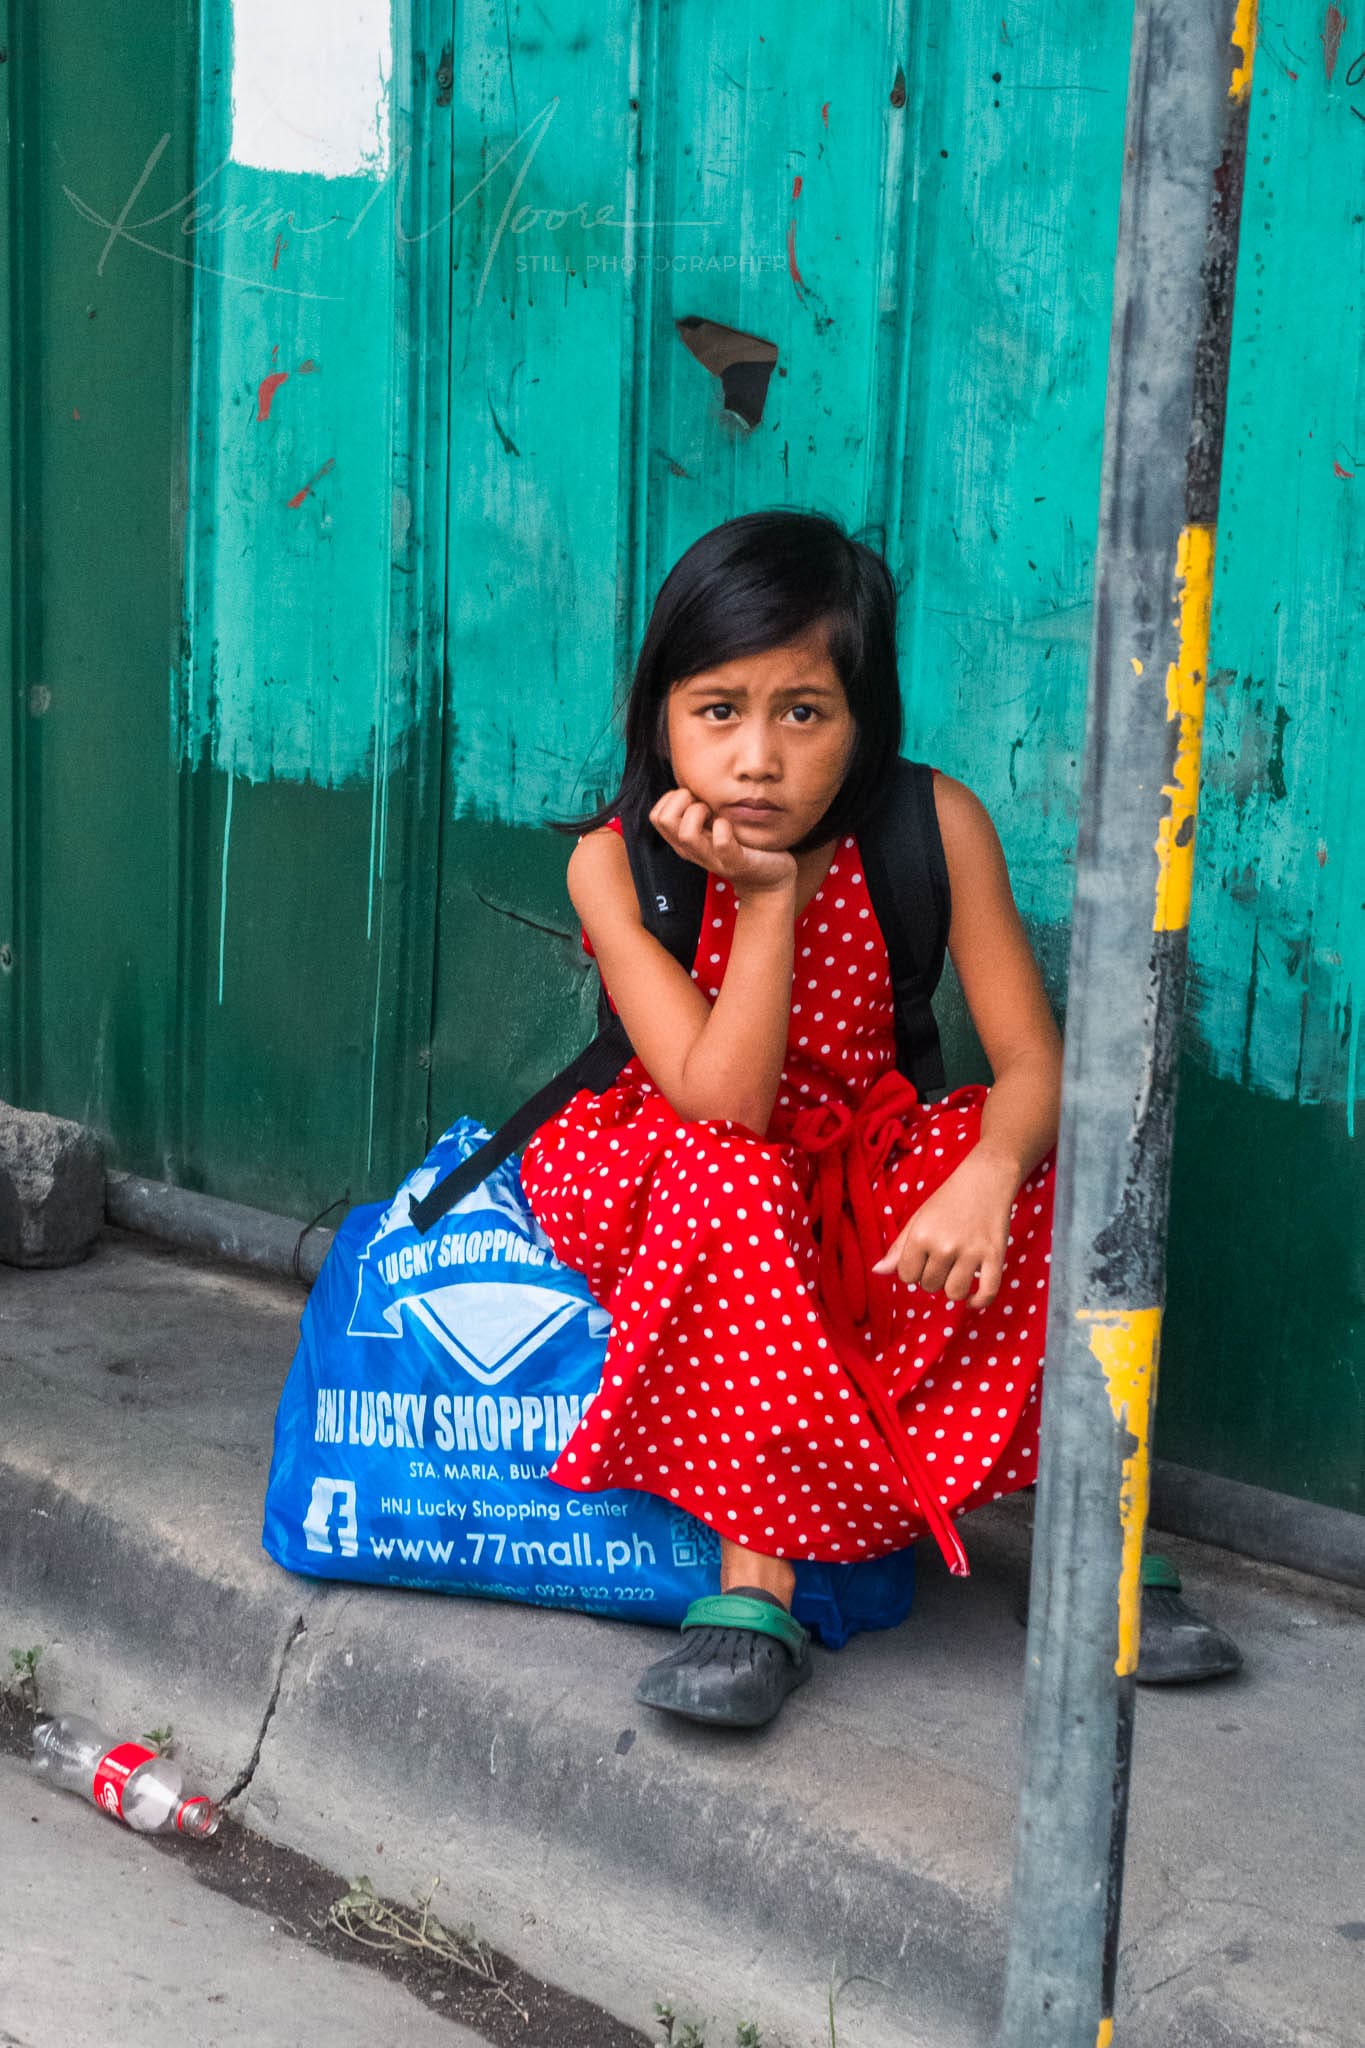 Young girl in the Philippines with a red polka dot dress waits for public transportation with a green backdrop.